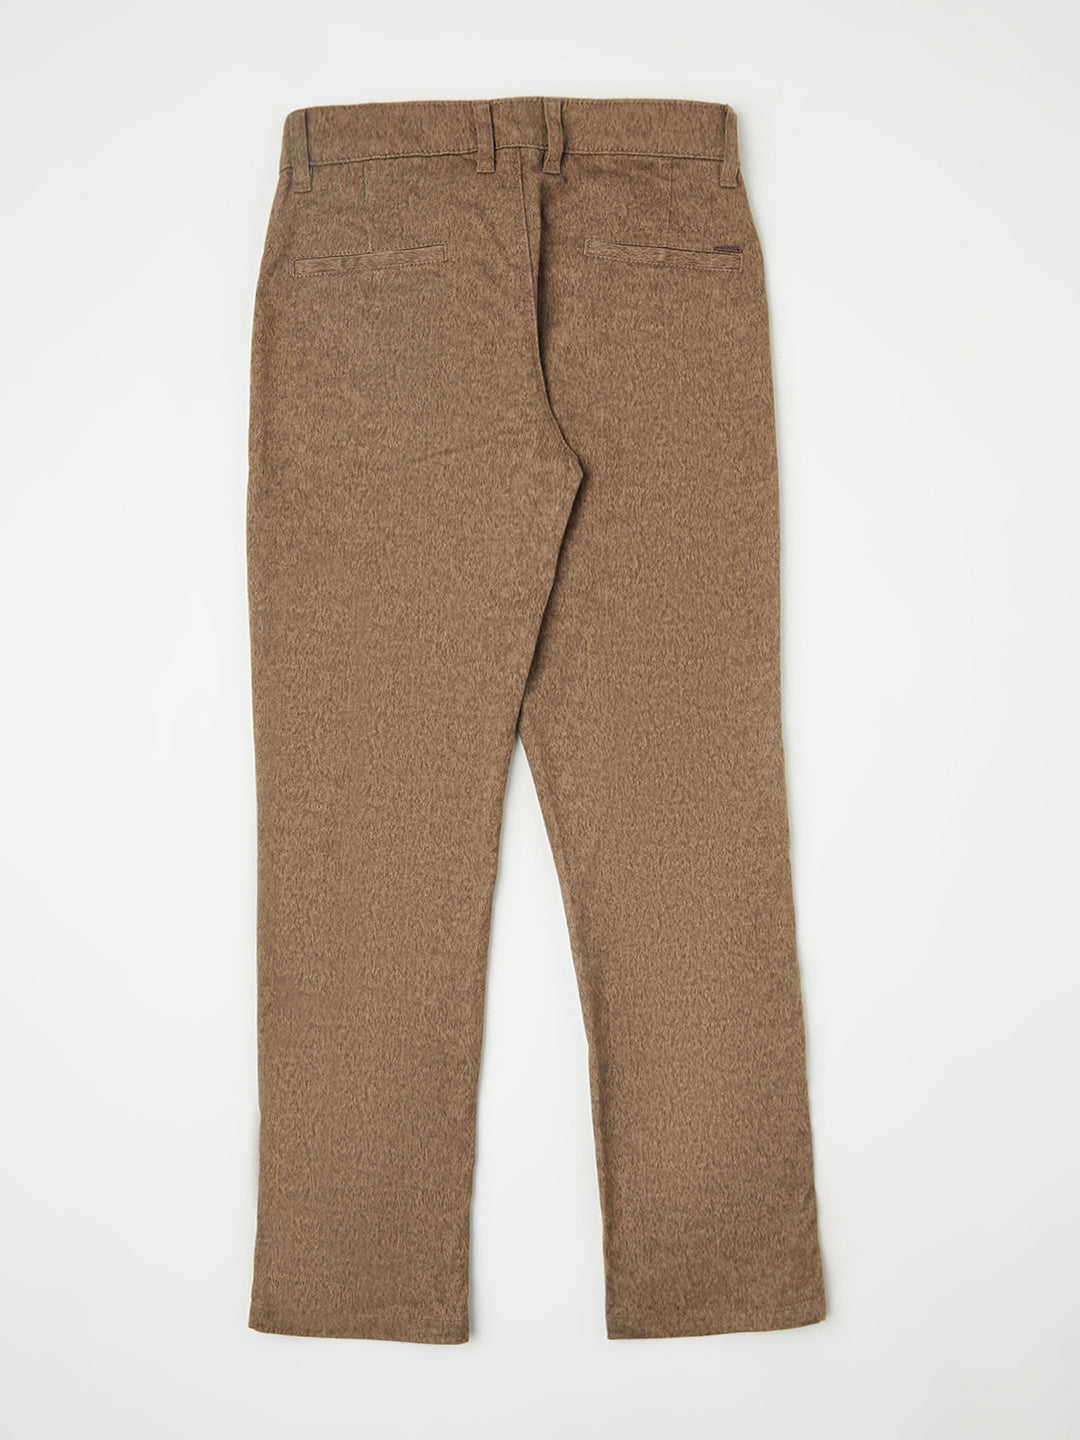 Brown Printed Trousers - Boys Trousers